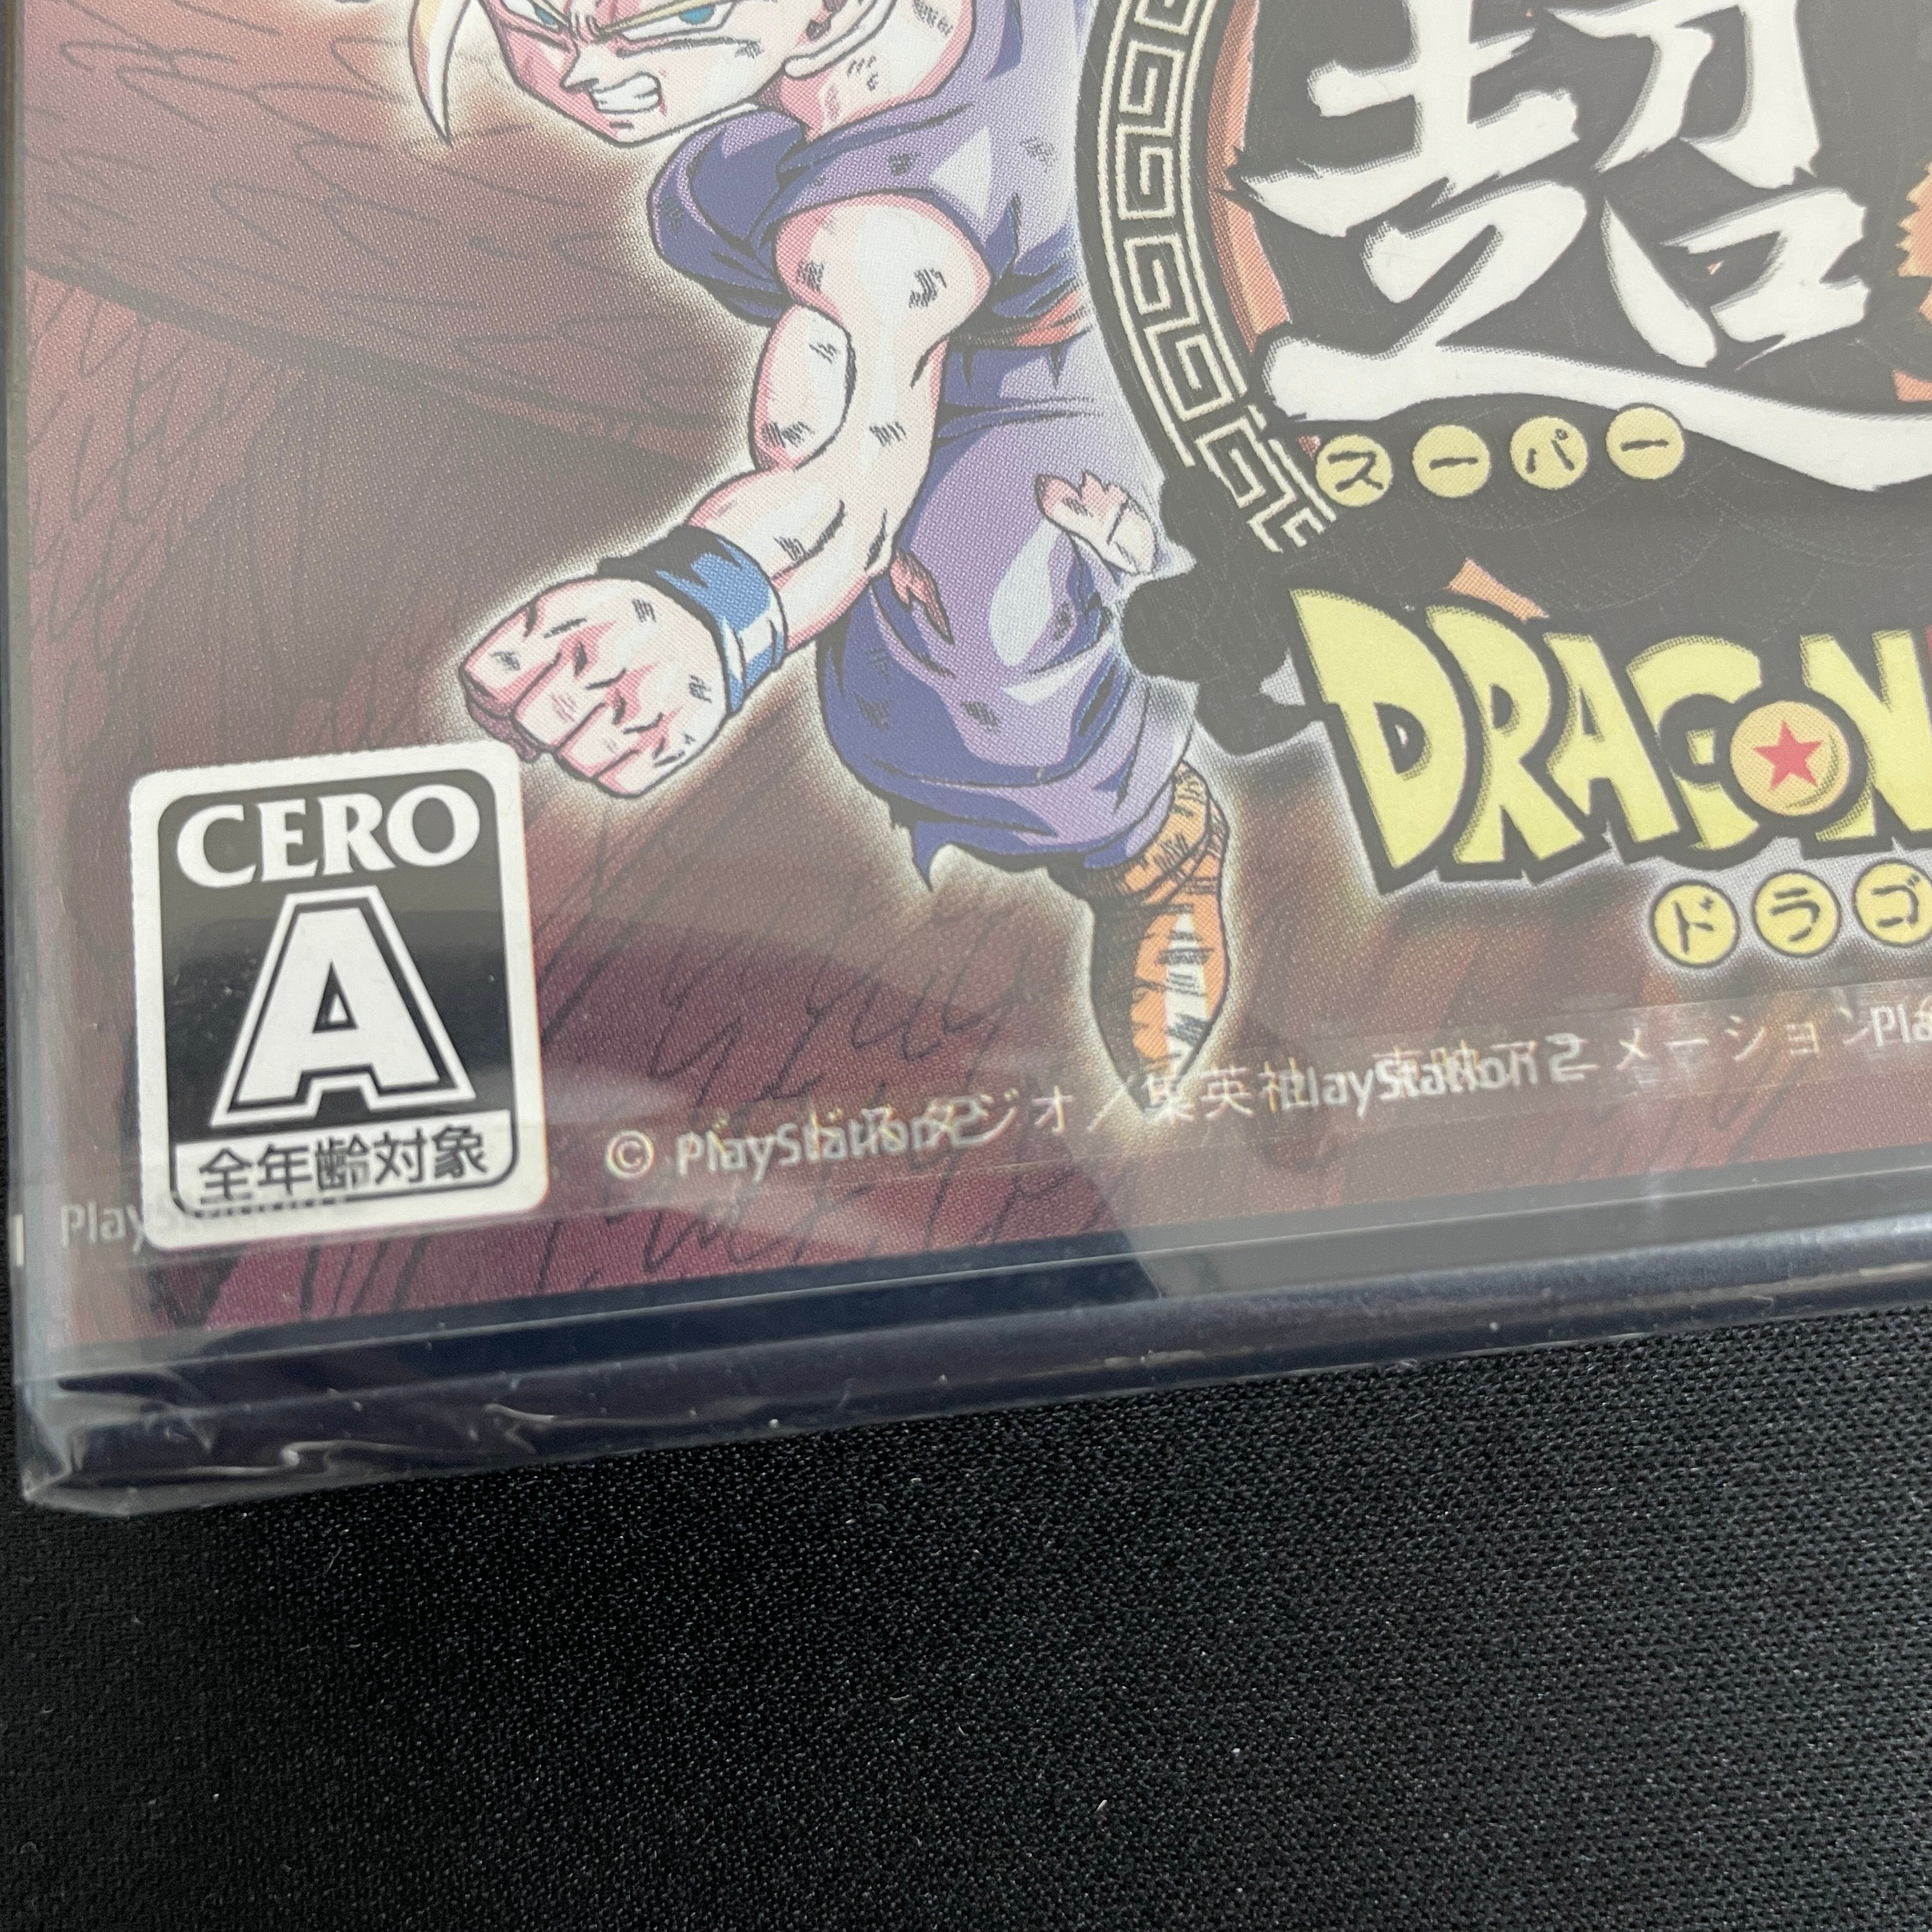 PlayStation 2 - SUPER DRAGON BALL Z - in sealed blister